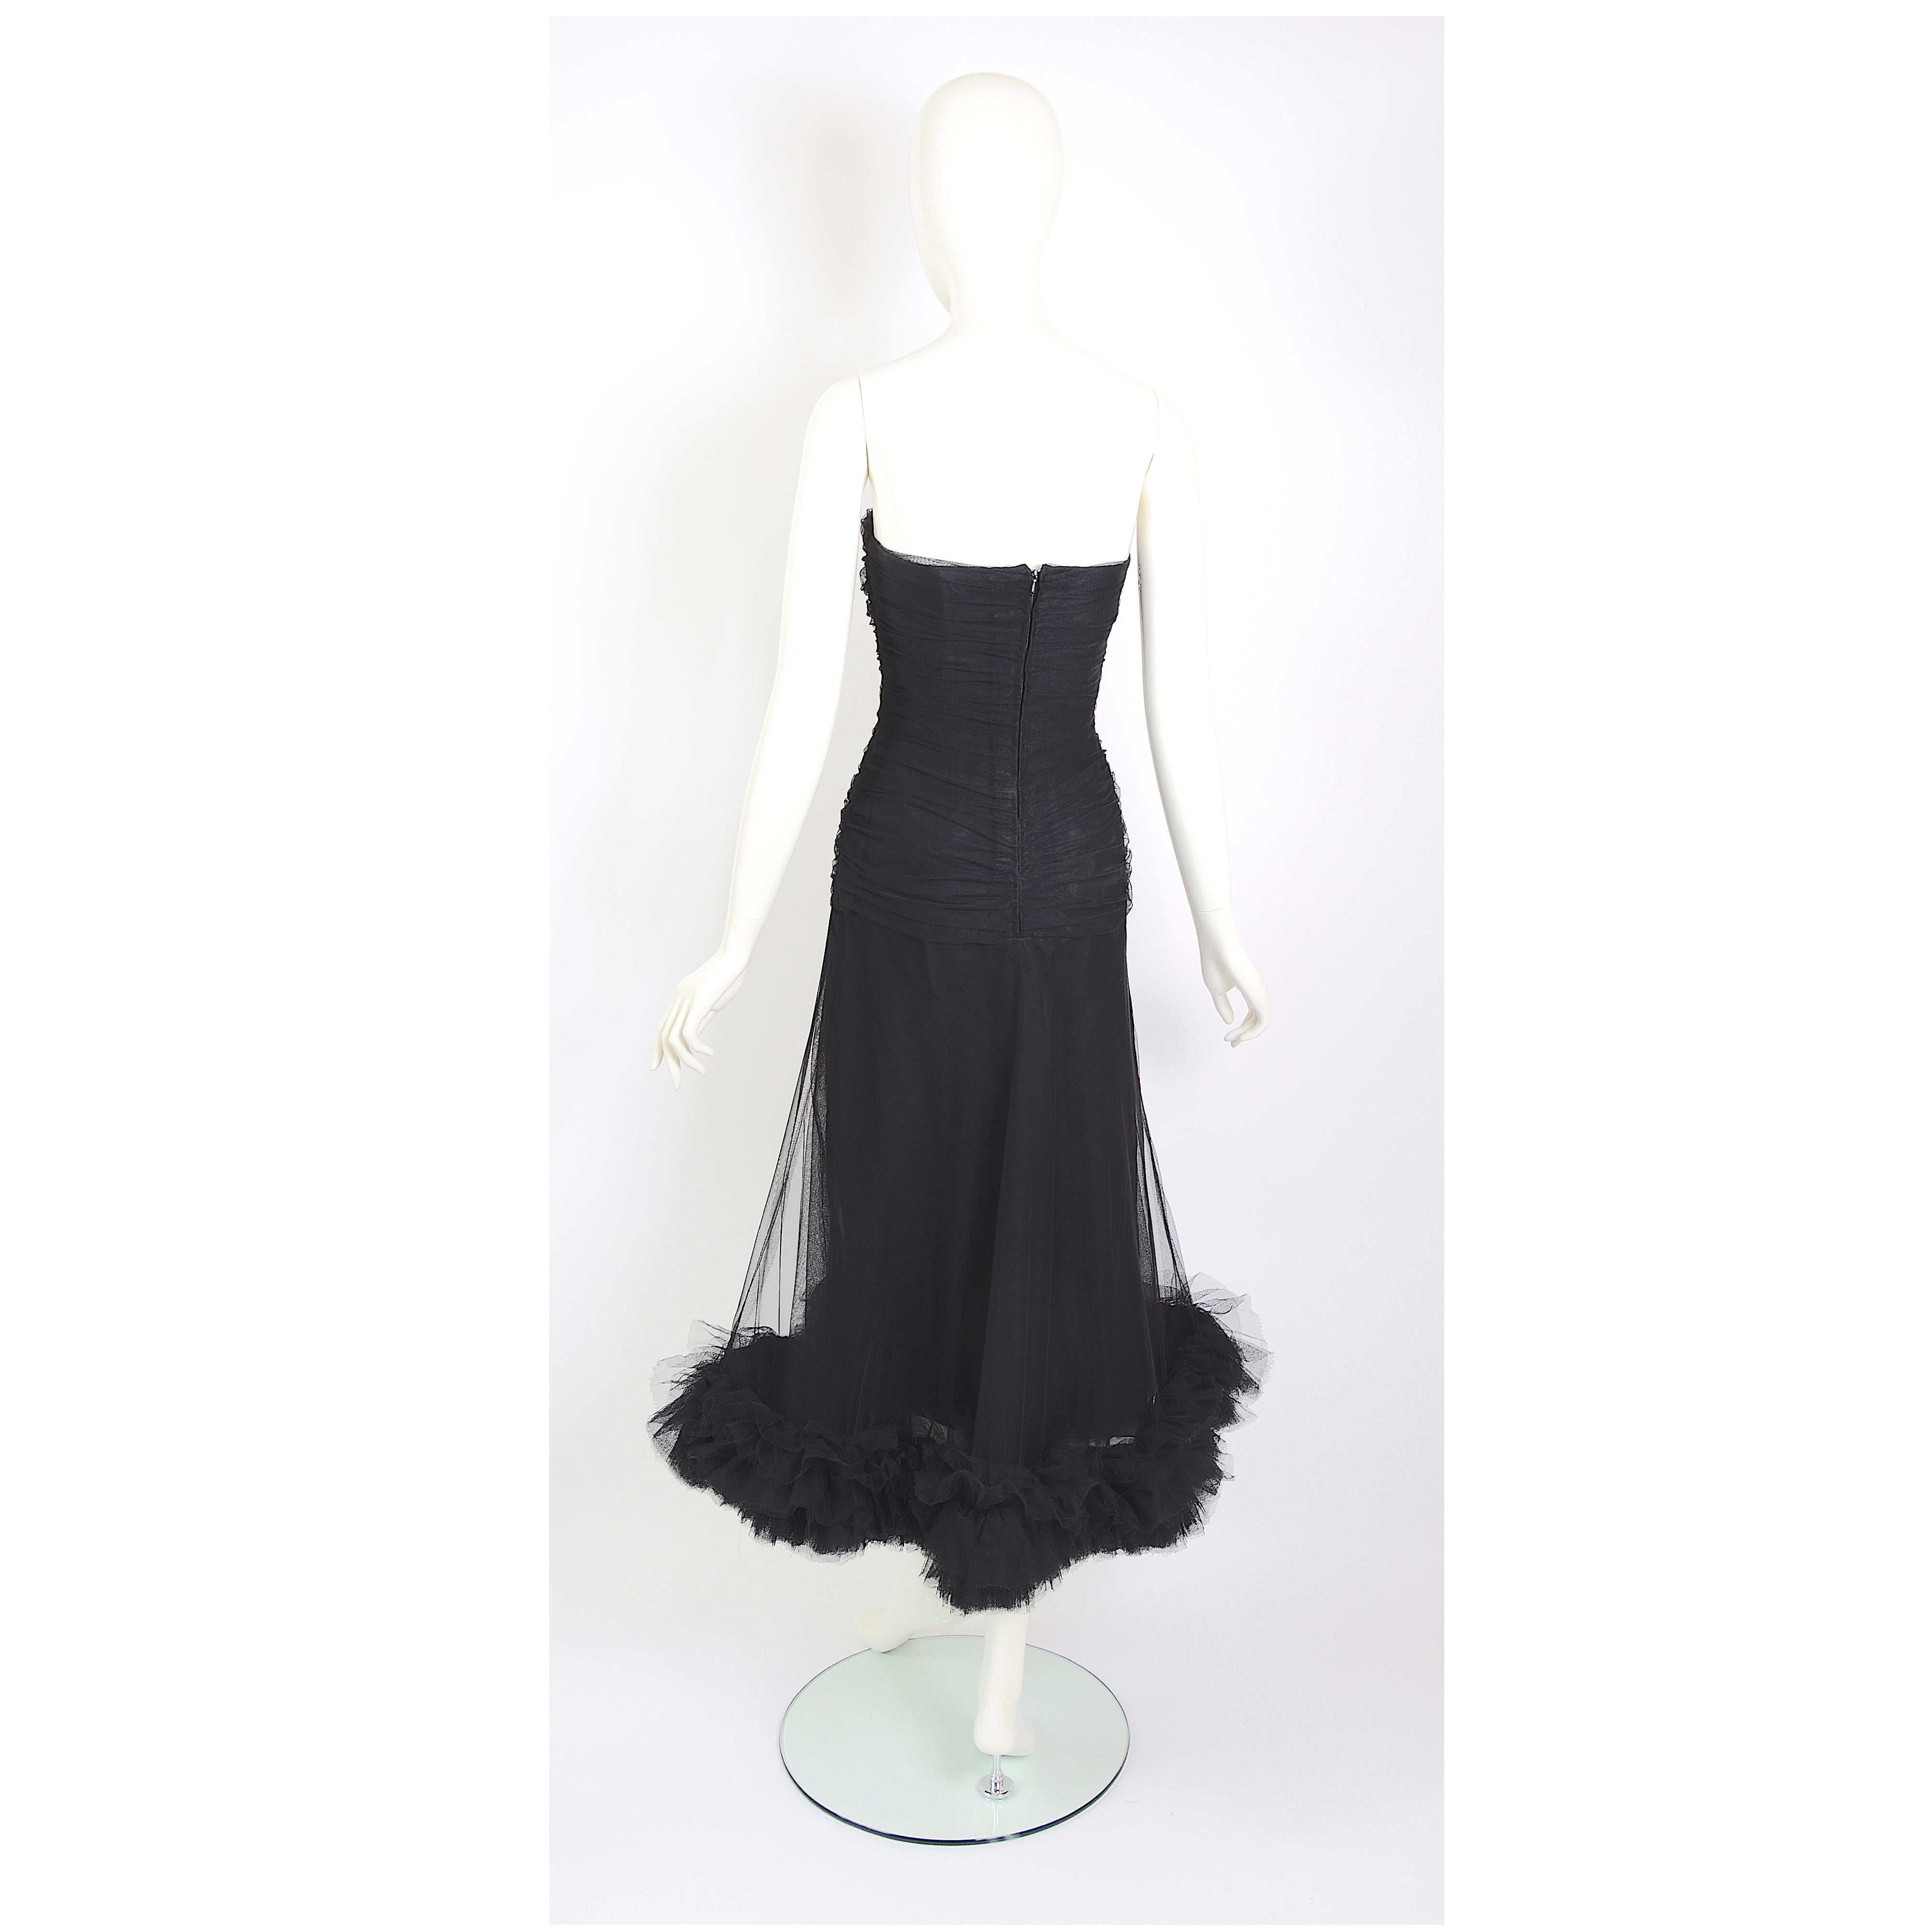 Christian Dior by Marc Bohan vintage numbered couture black tulle evening dress For Sale 1